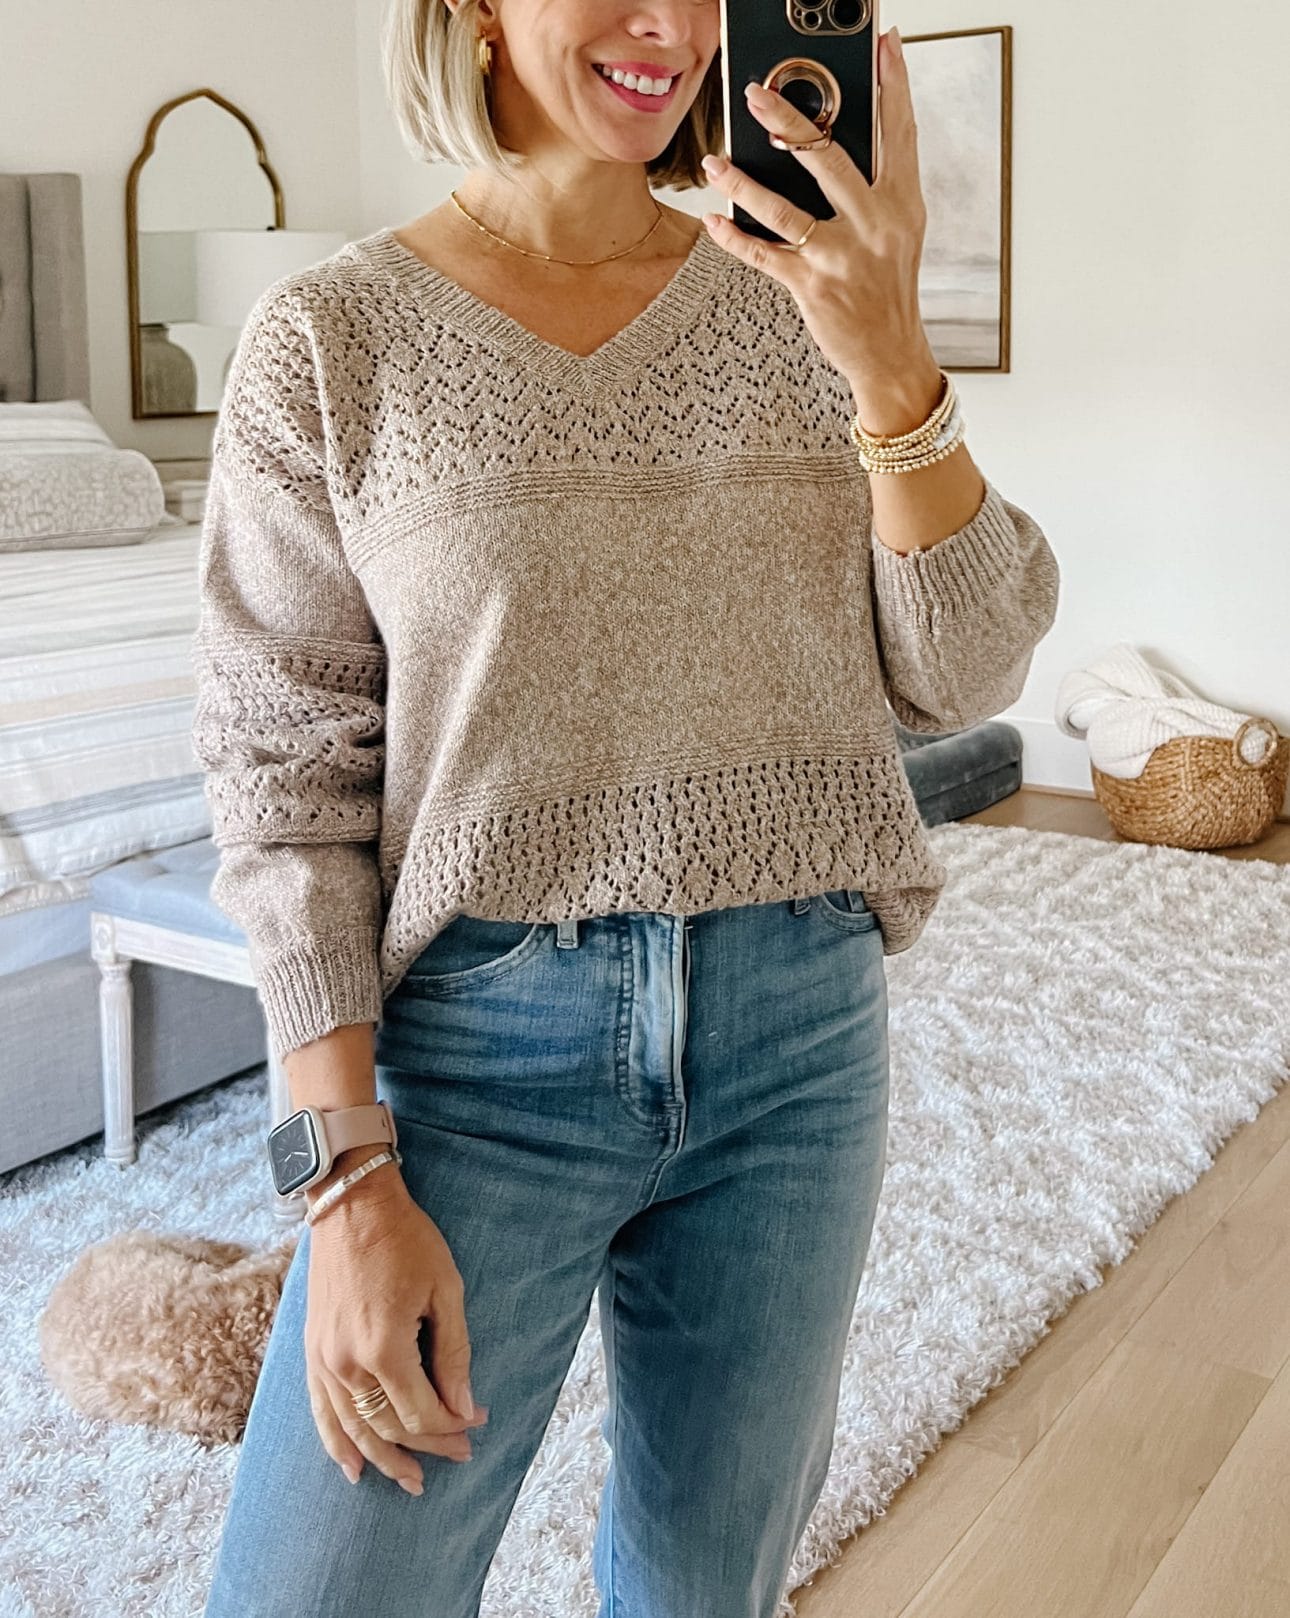 Pointelle Sweater, Jeans